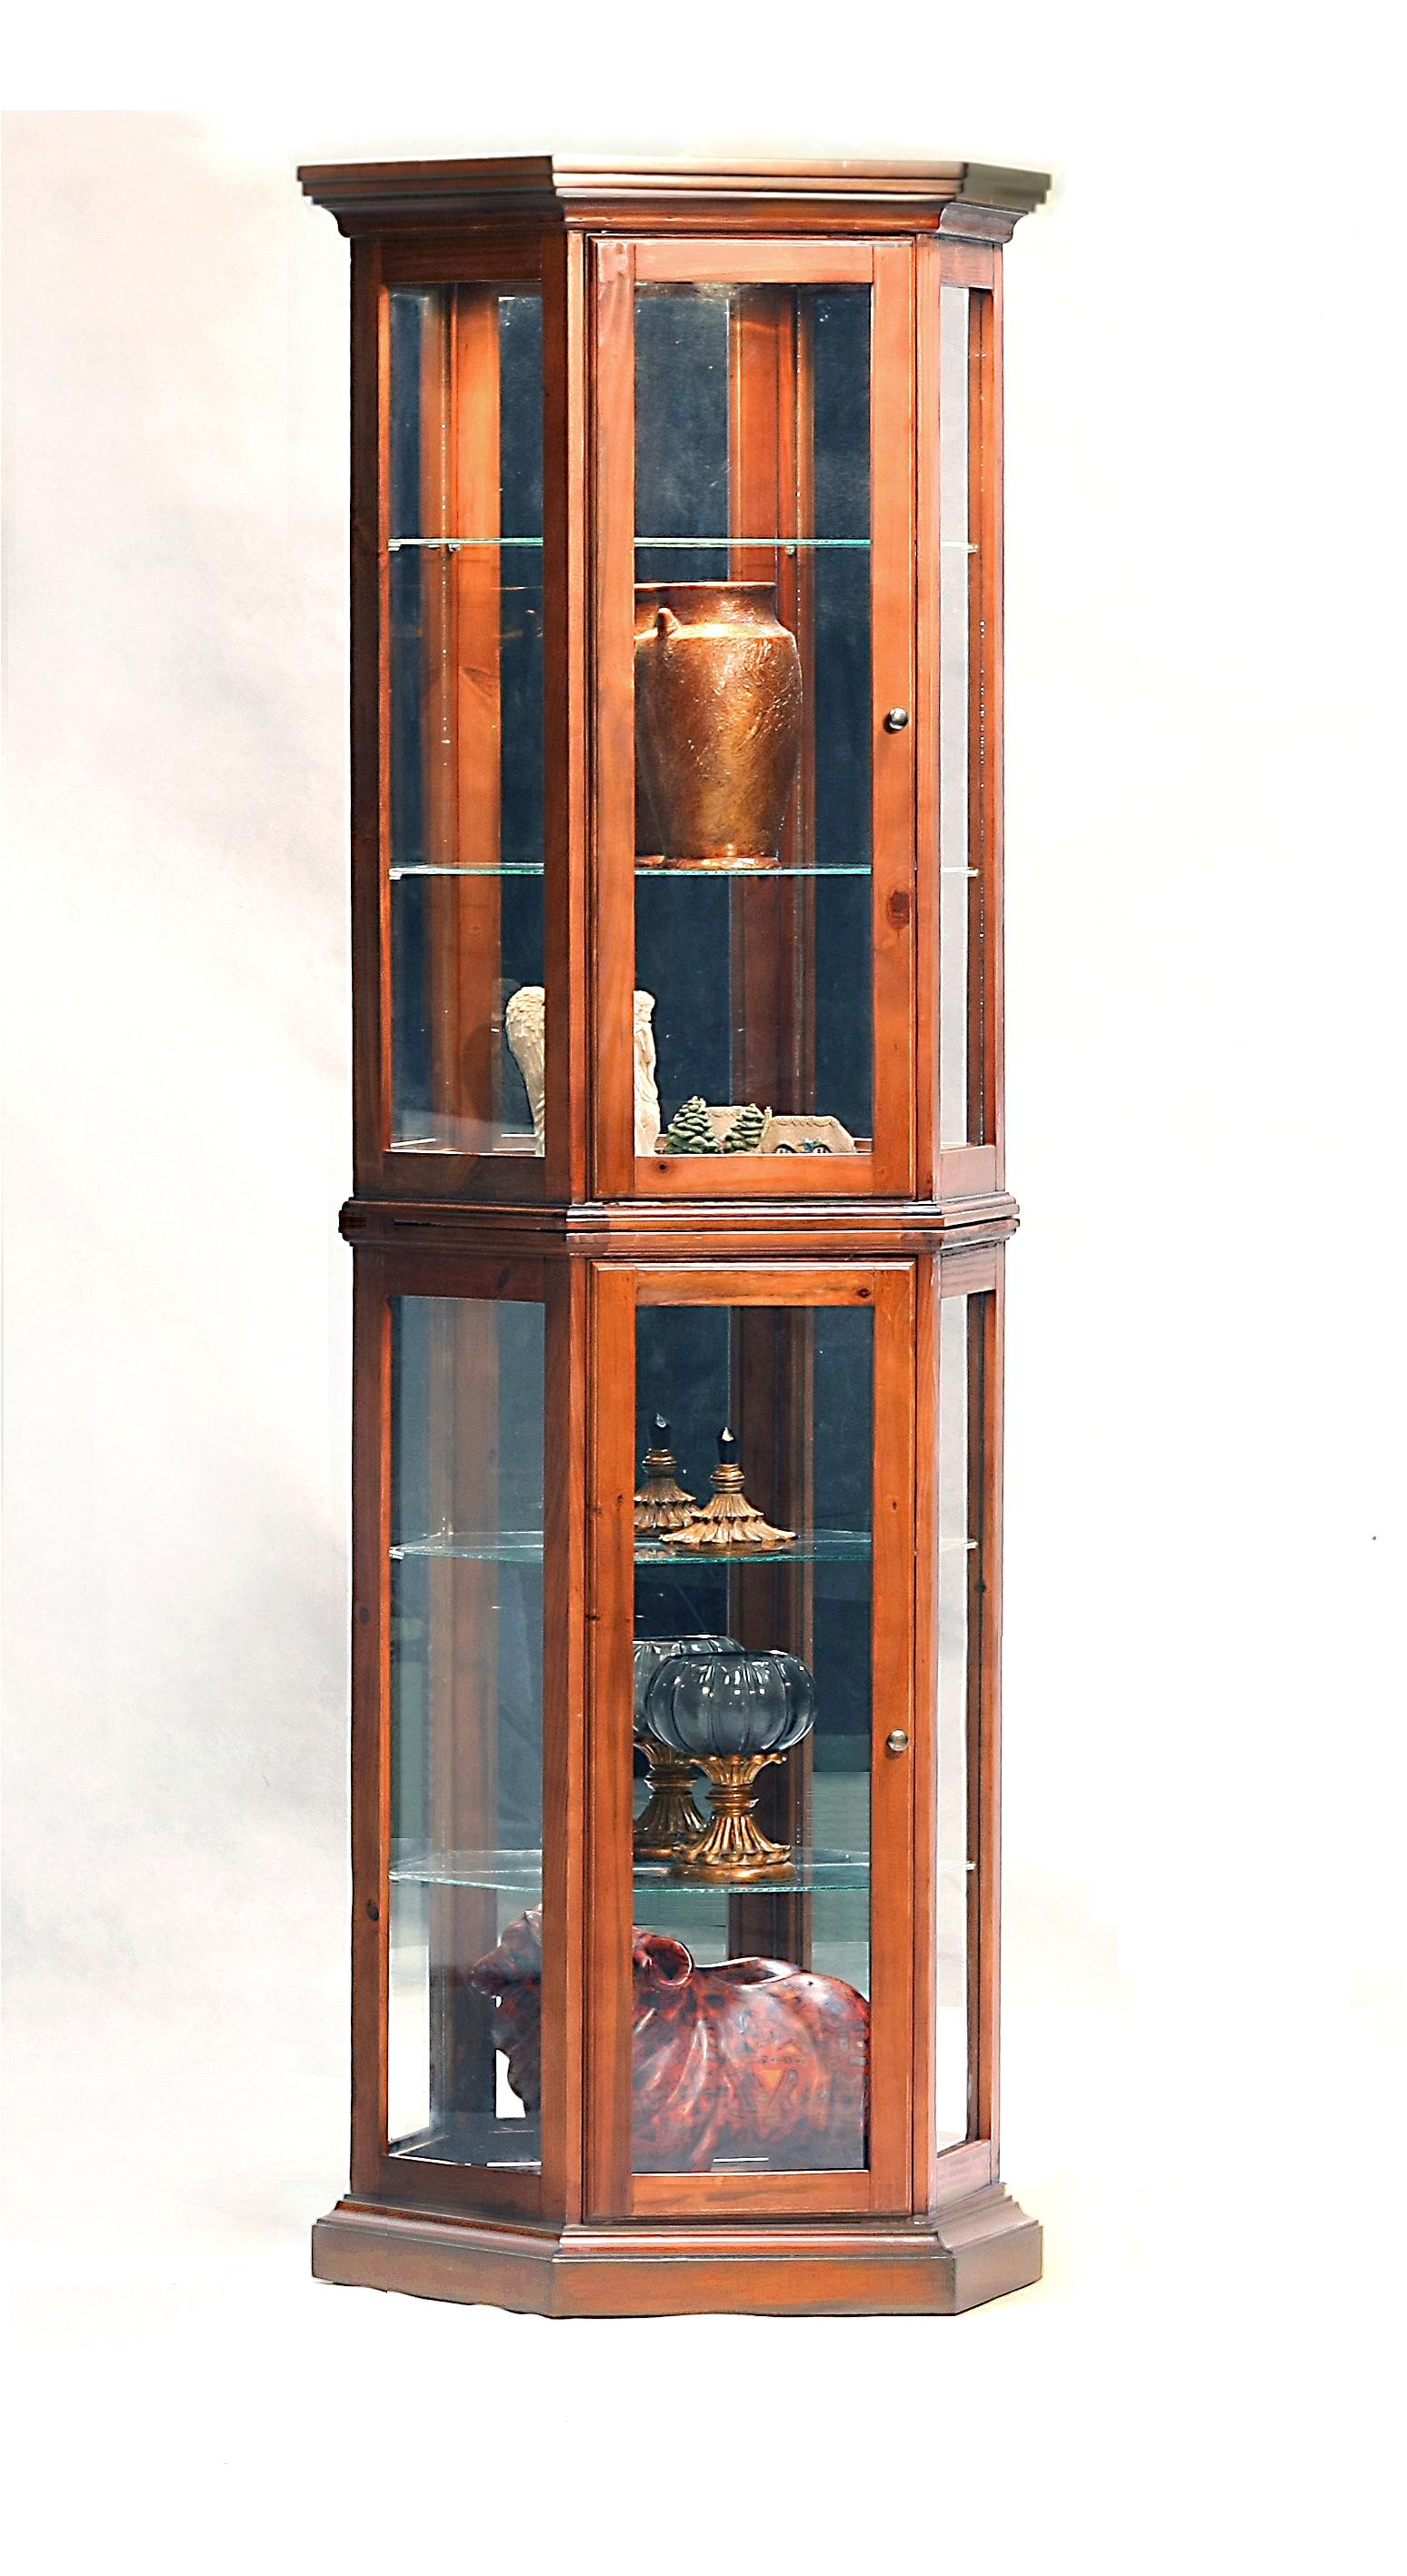 Oak Curio Cabinets for Sale Cabinet Stirring Large Curio Cabinet Images Inspirations John